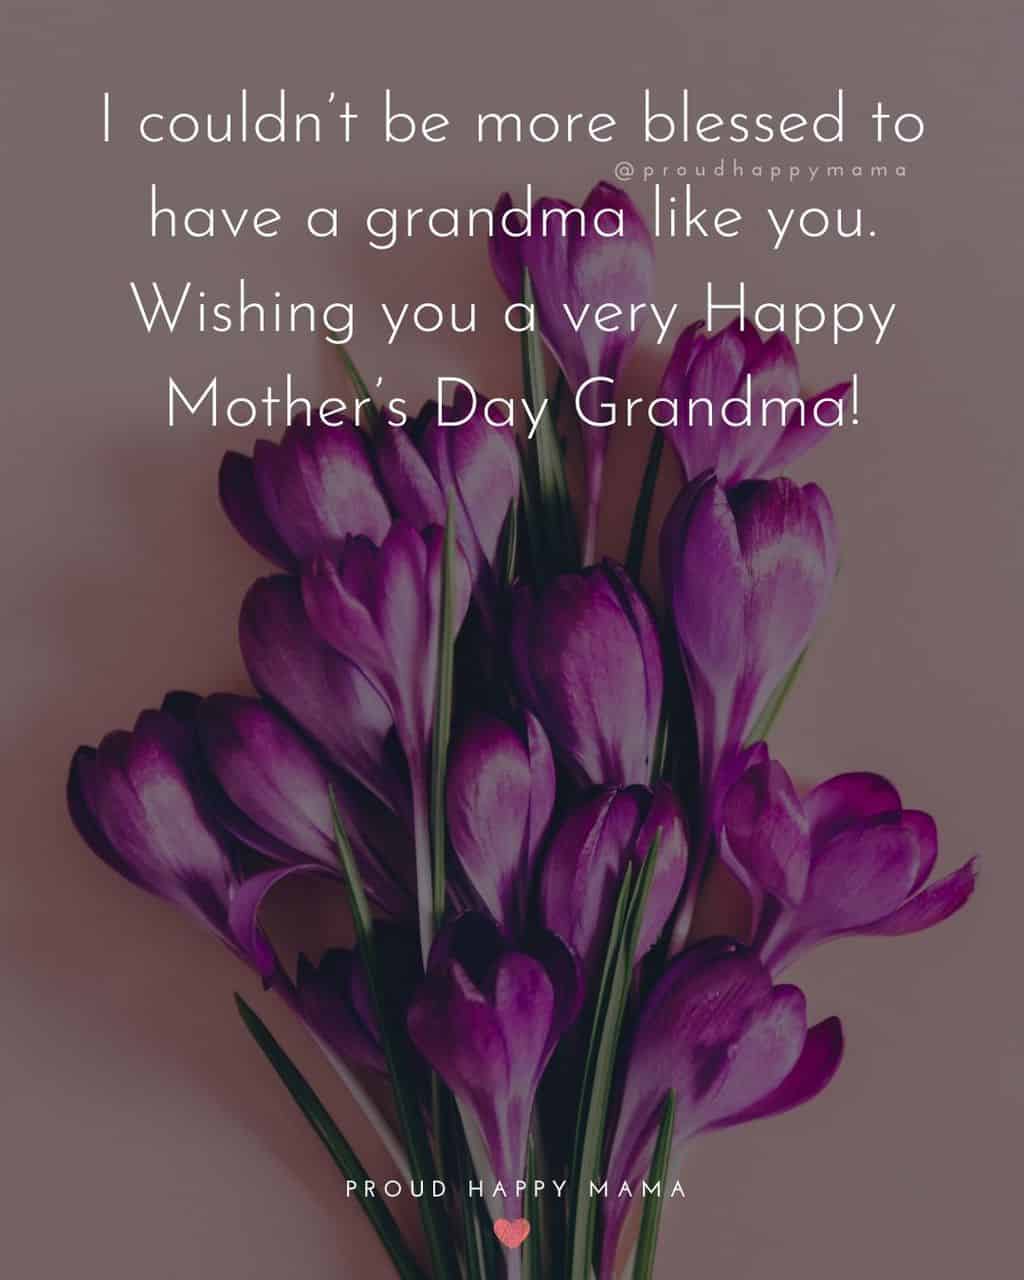 Happy Mothers Day Quotes To Grandma - I couldn’t be more blessed to have a grandma like you. Wishing you a very Happy